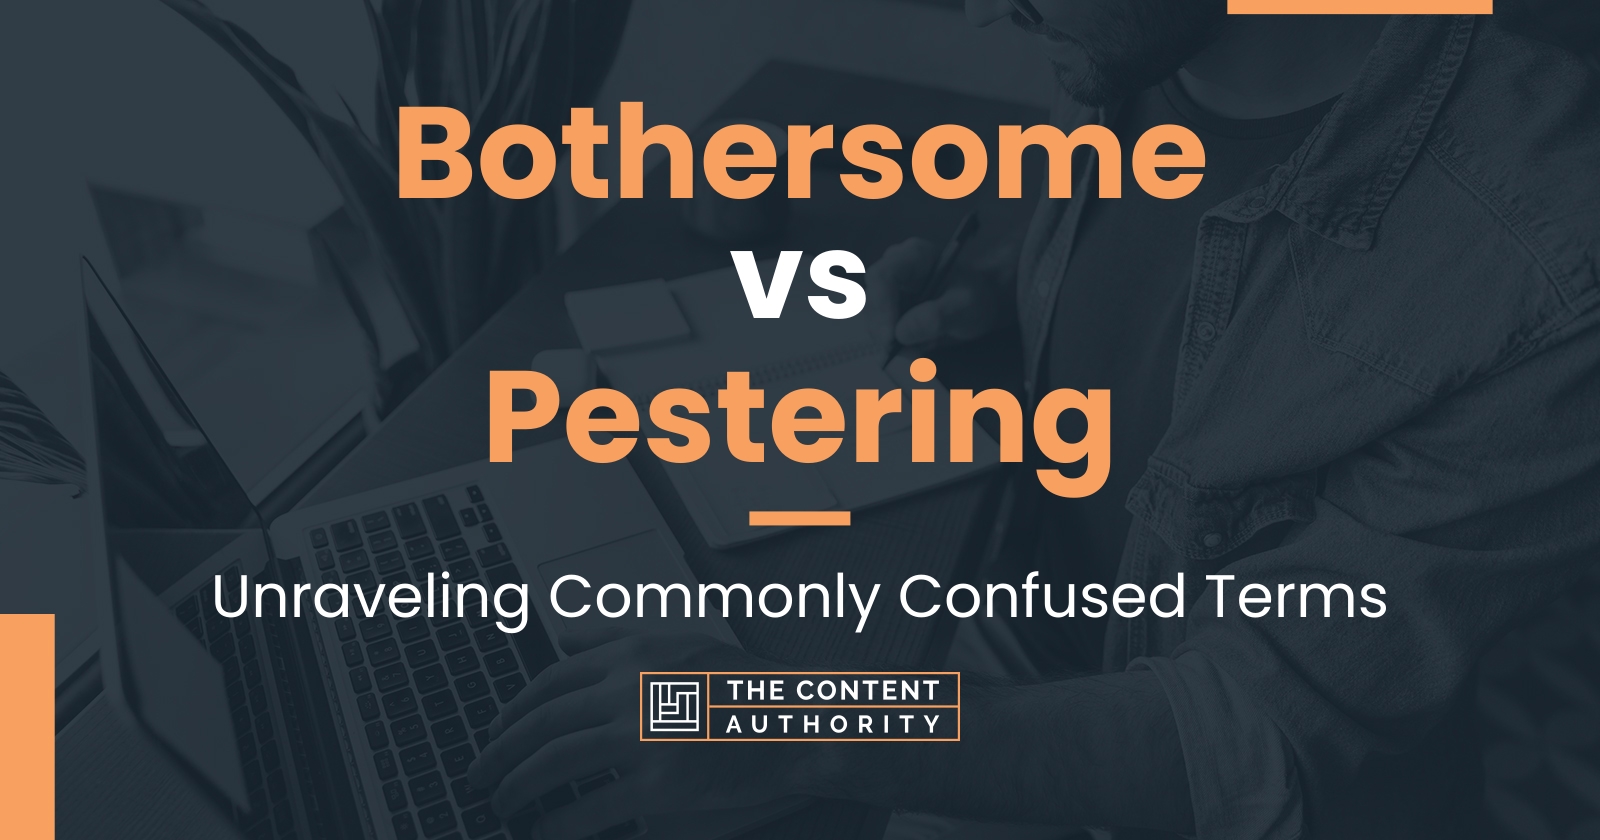 Bothersome vs Pestering: Unraveling Commonly Confused Terms